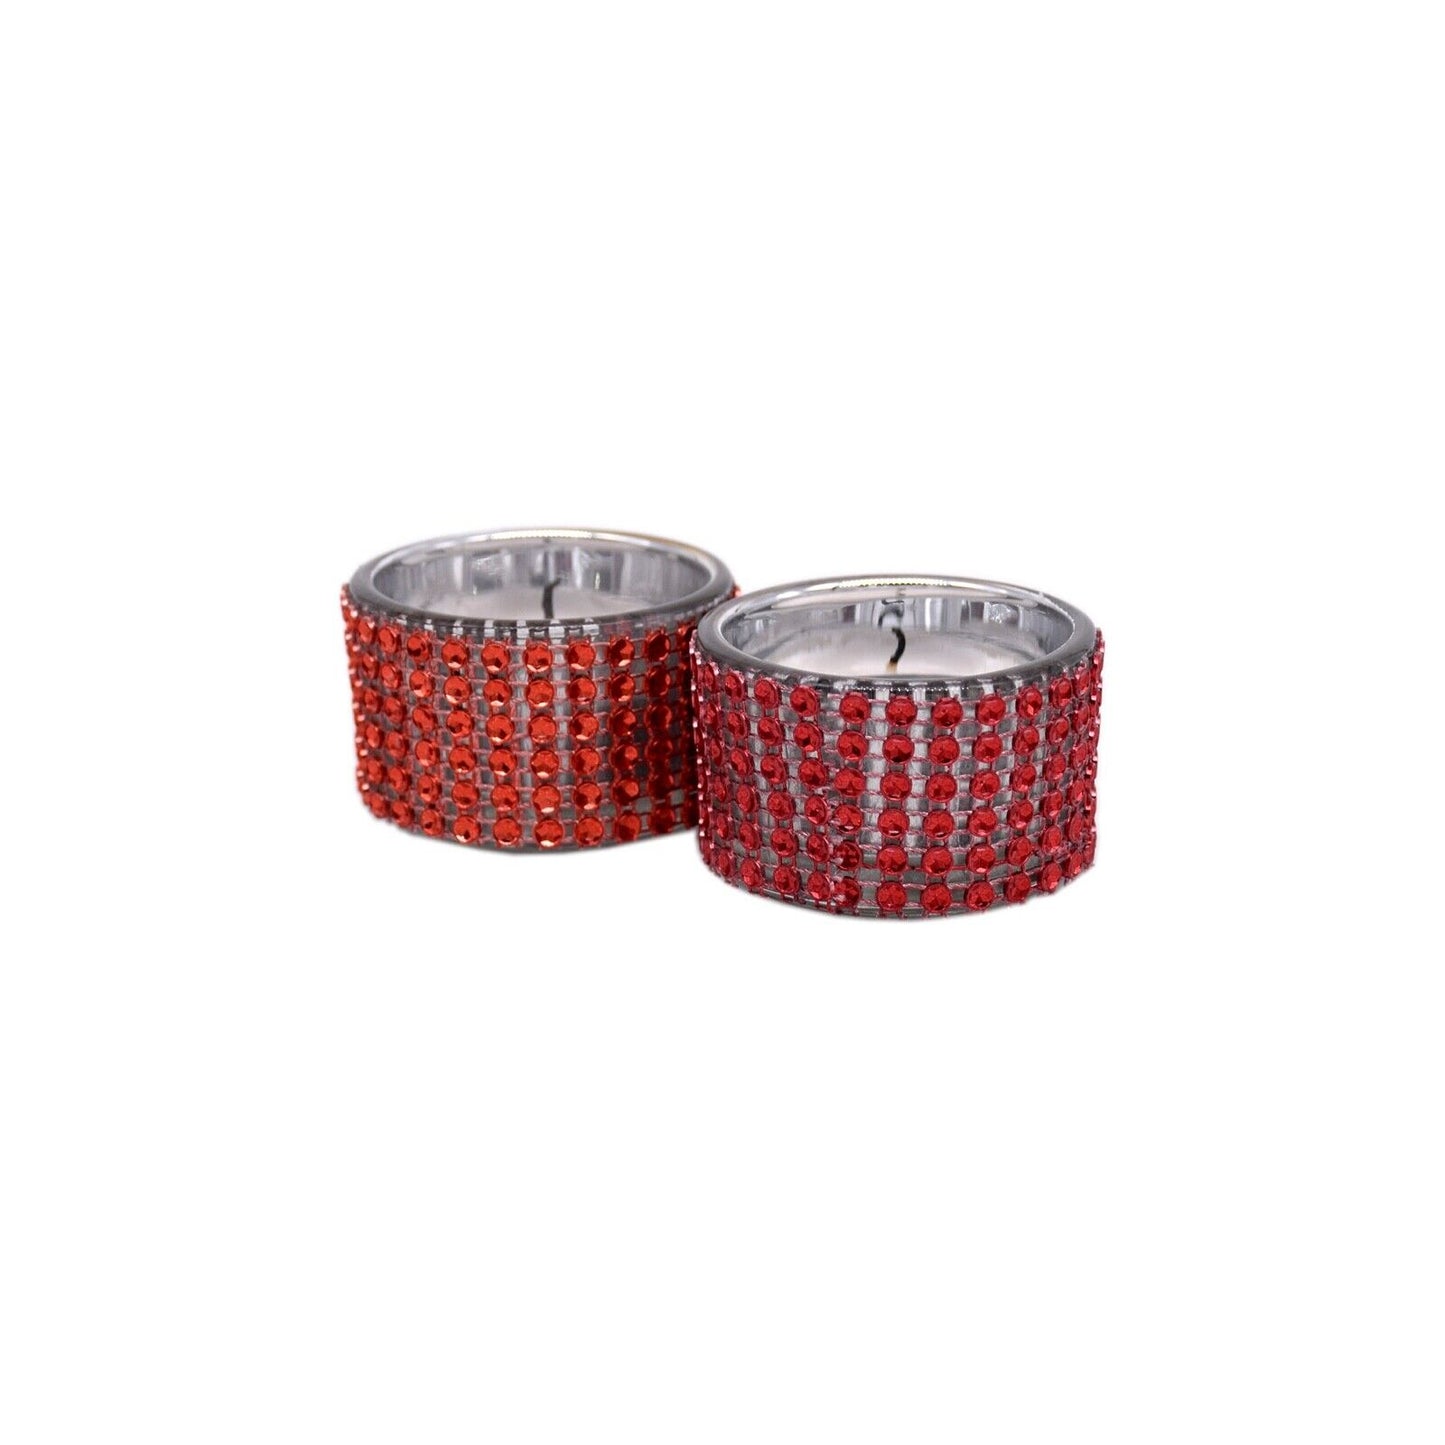 2 Decorative Diamante Jewelled Tea light Candle Holders with 100 Tealights (8hr)